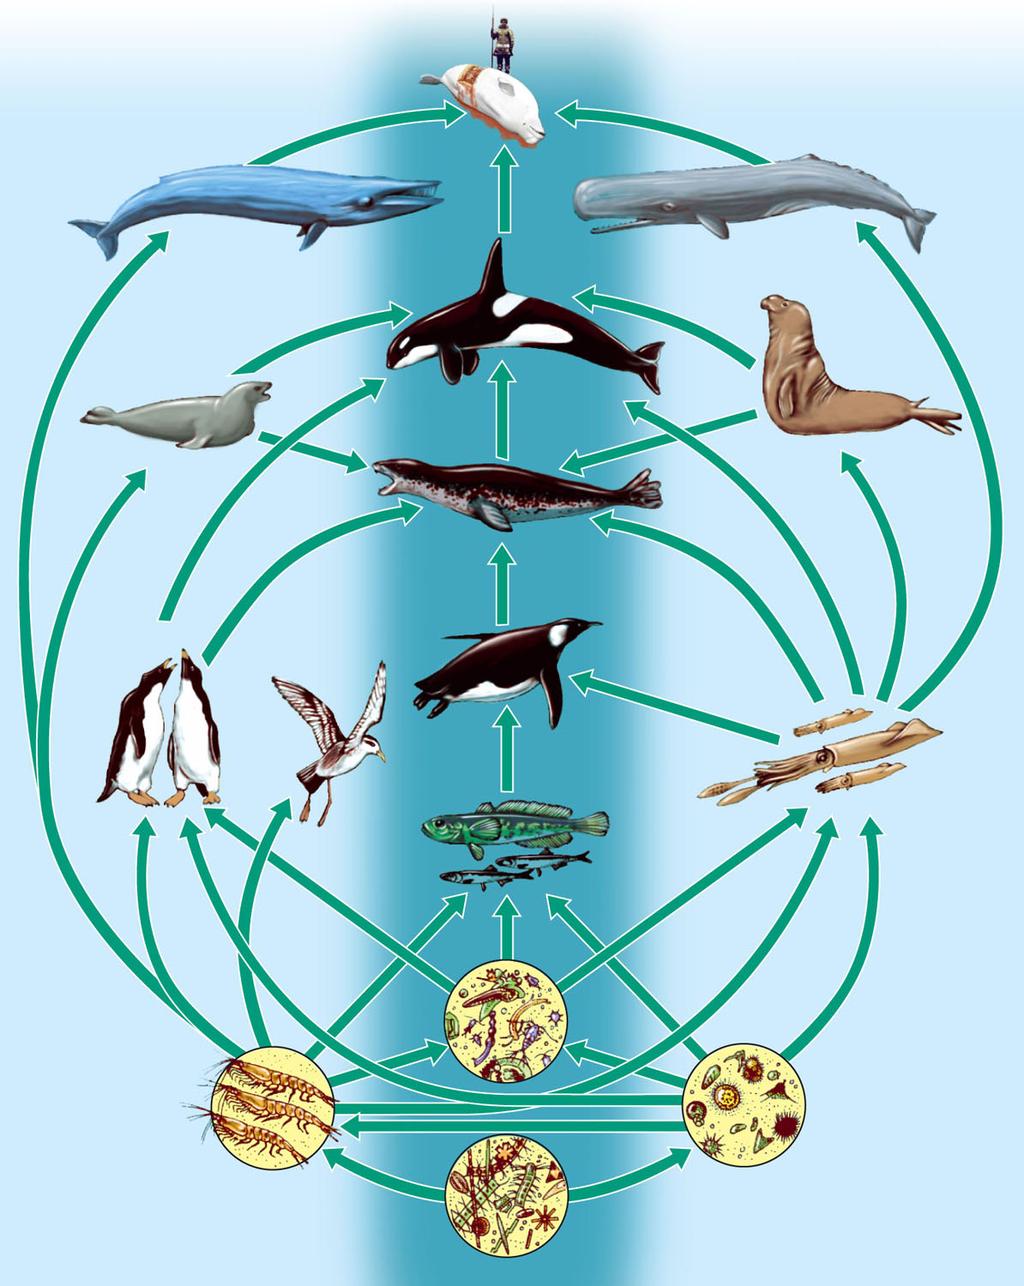 Detritivores and decomposers process detritus from all trophic levels. Fig.